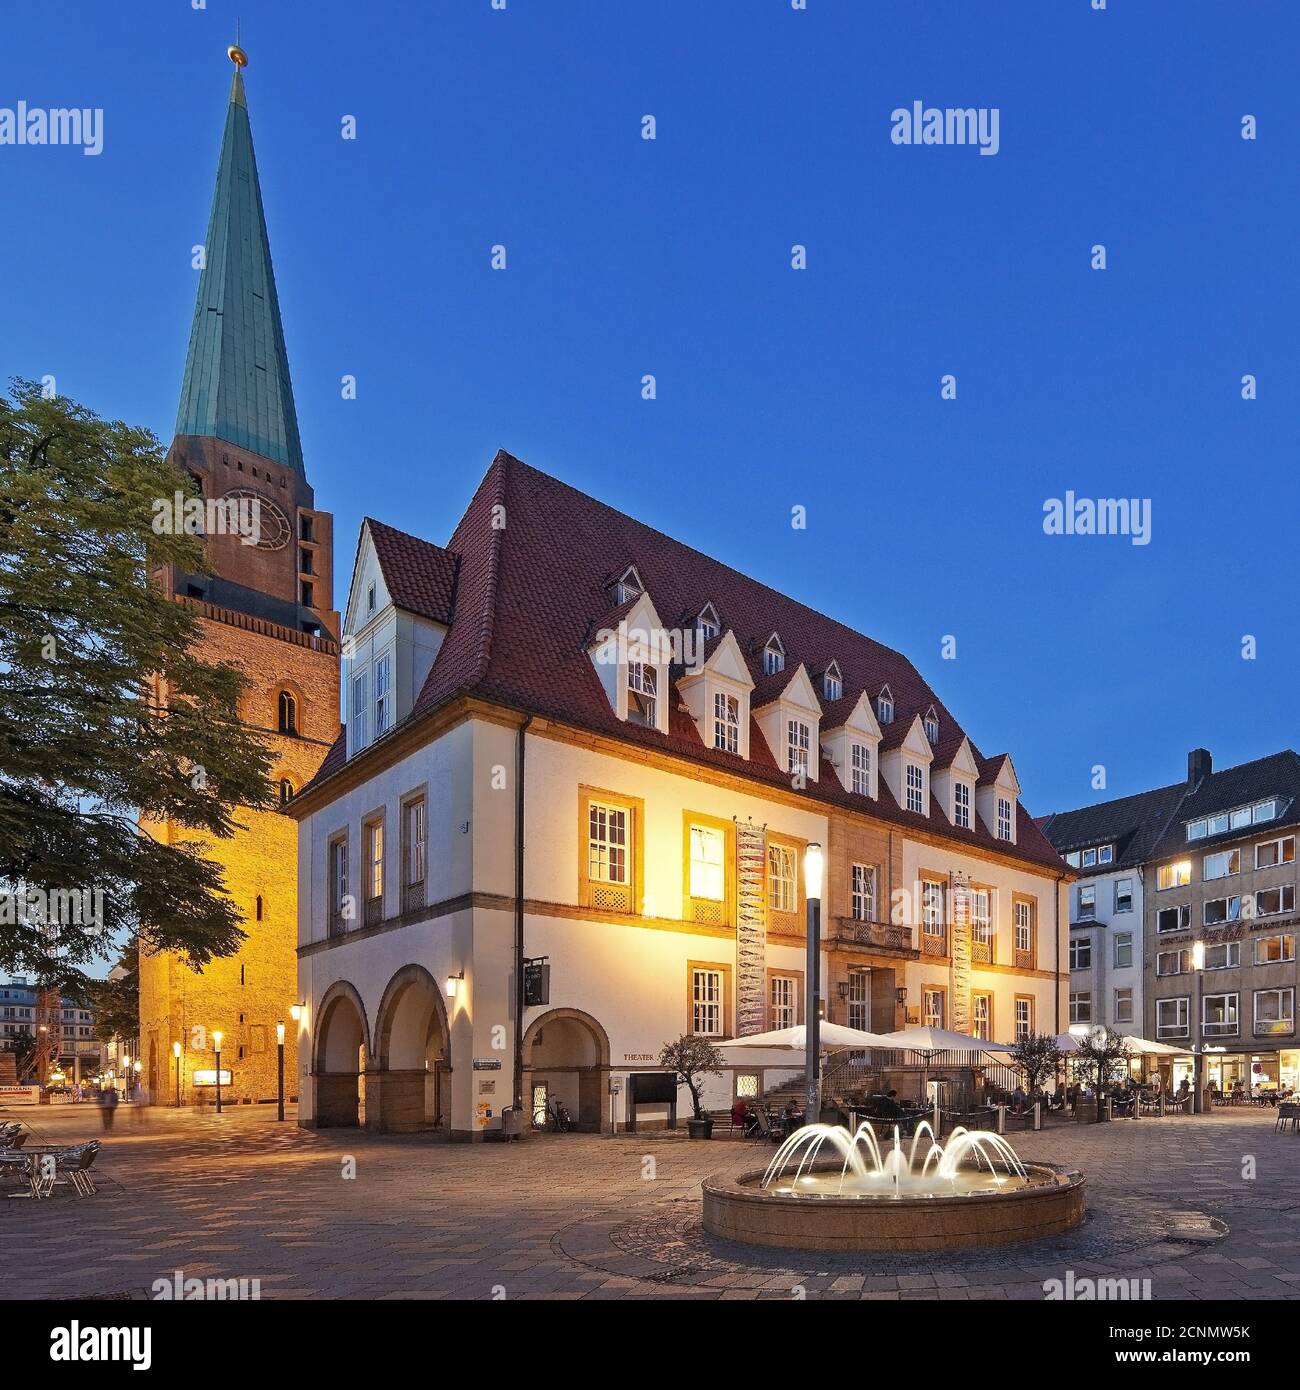 Old market with old town Nicolai church and theater TAM in the evening, Bielefeld, Germany, Europe Stock Photo